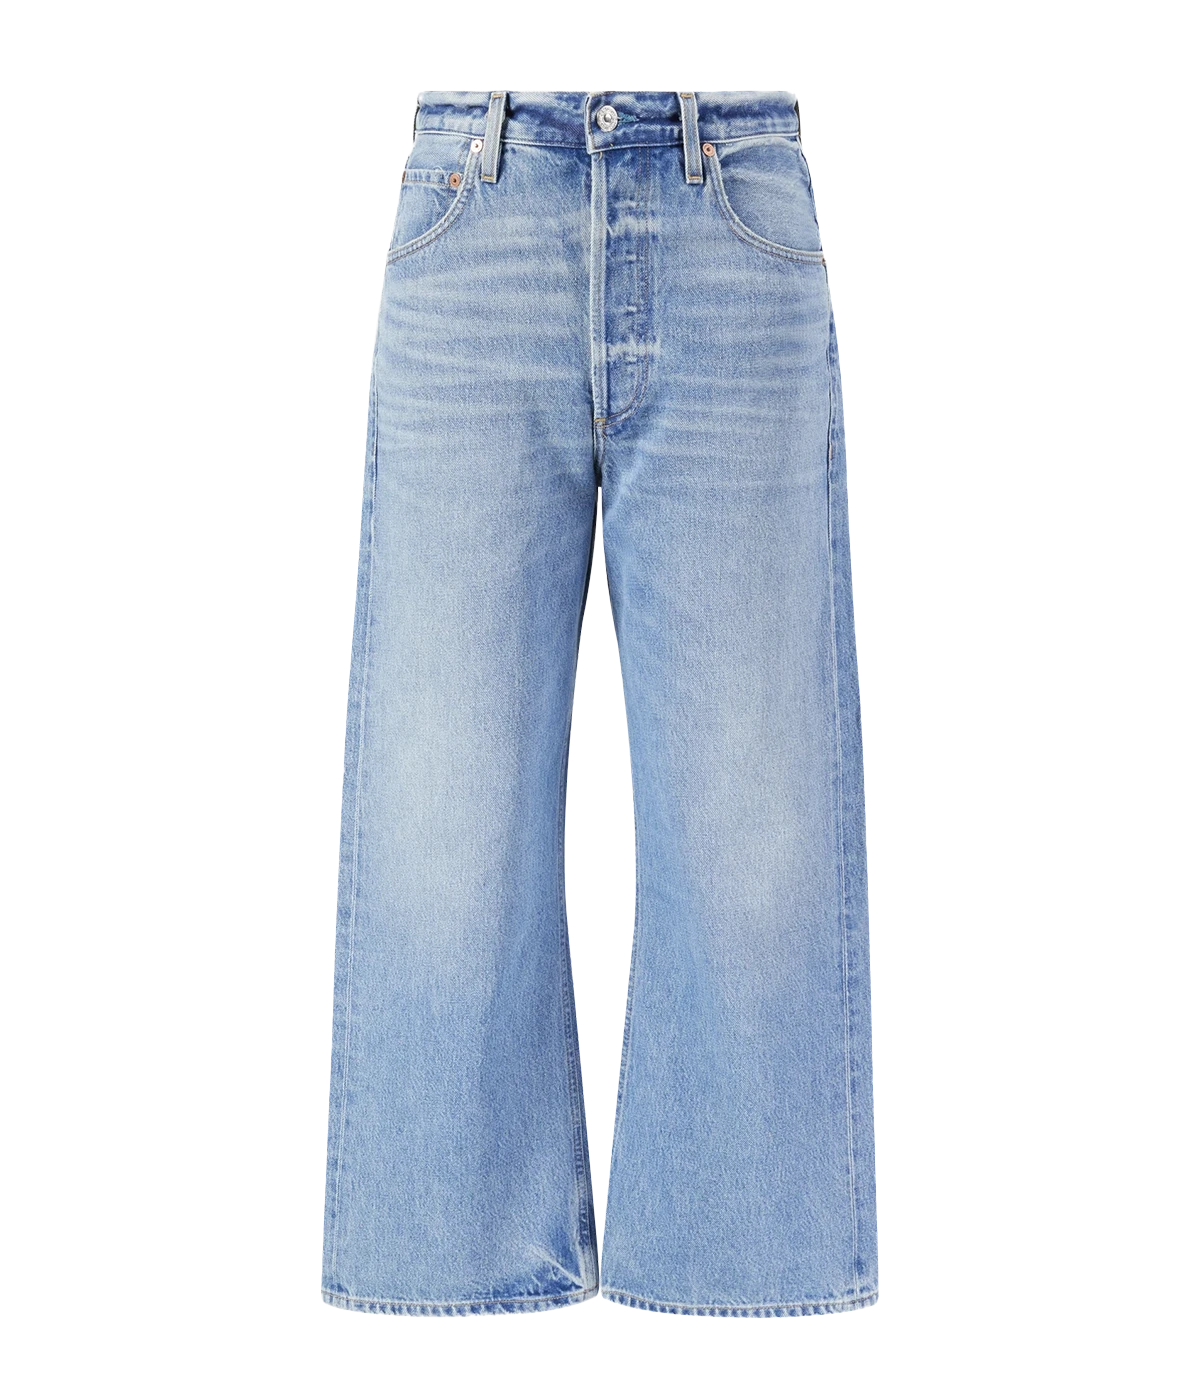 A light blue washed elevated denim jean, Featuring a wide leg, horse shoe jean clean hem, zip and button closure and 5 pockets. Elevated Jean, Everyday Jean, Vintage inspired jean, made in USA, comfortable, organic. 